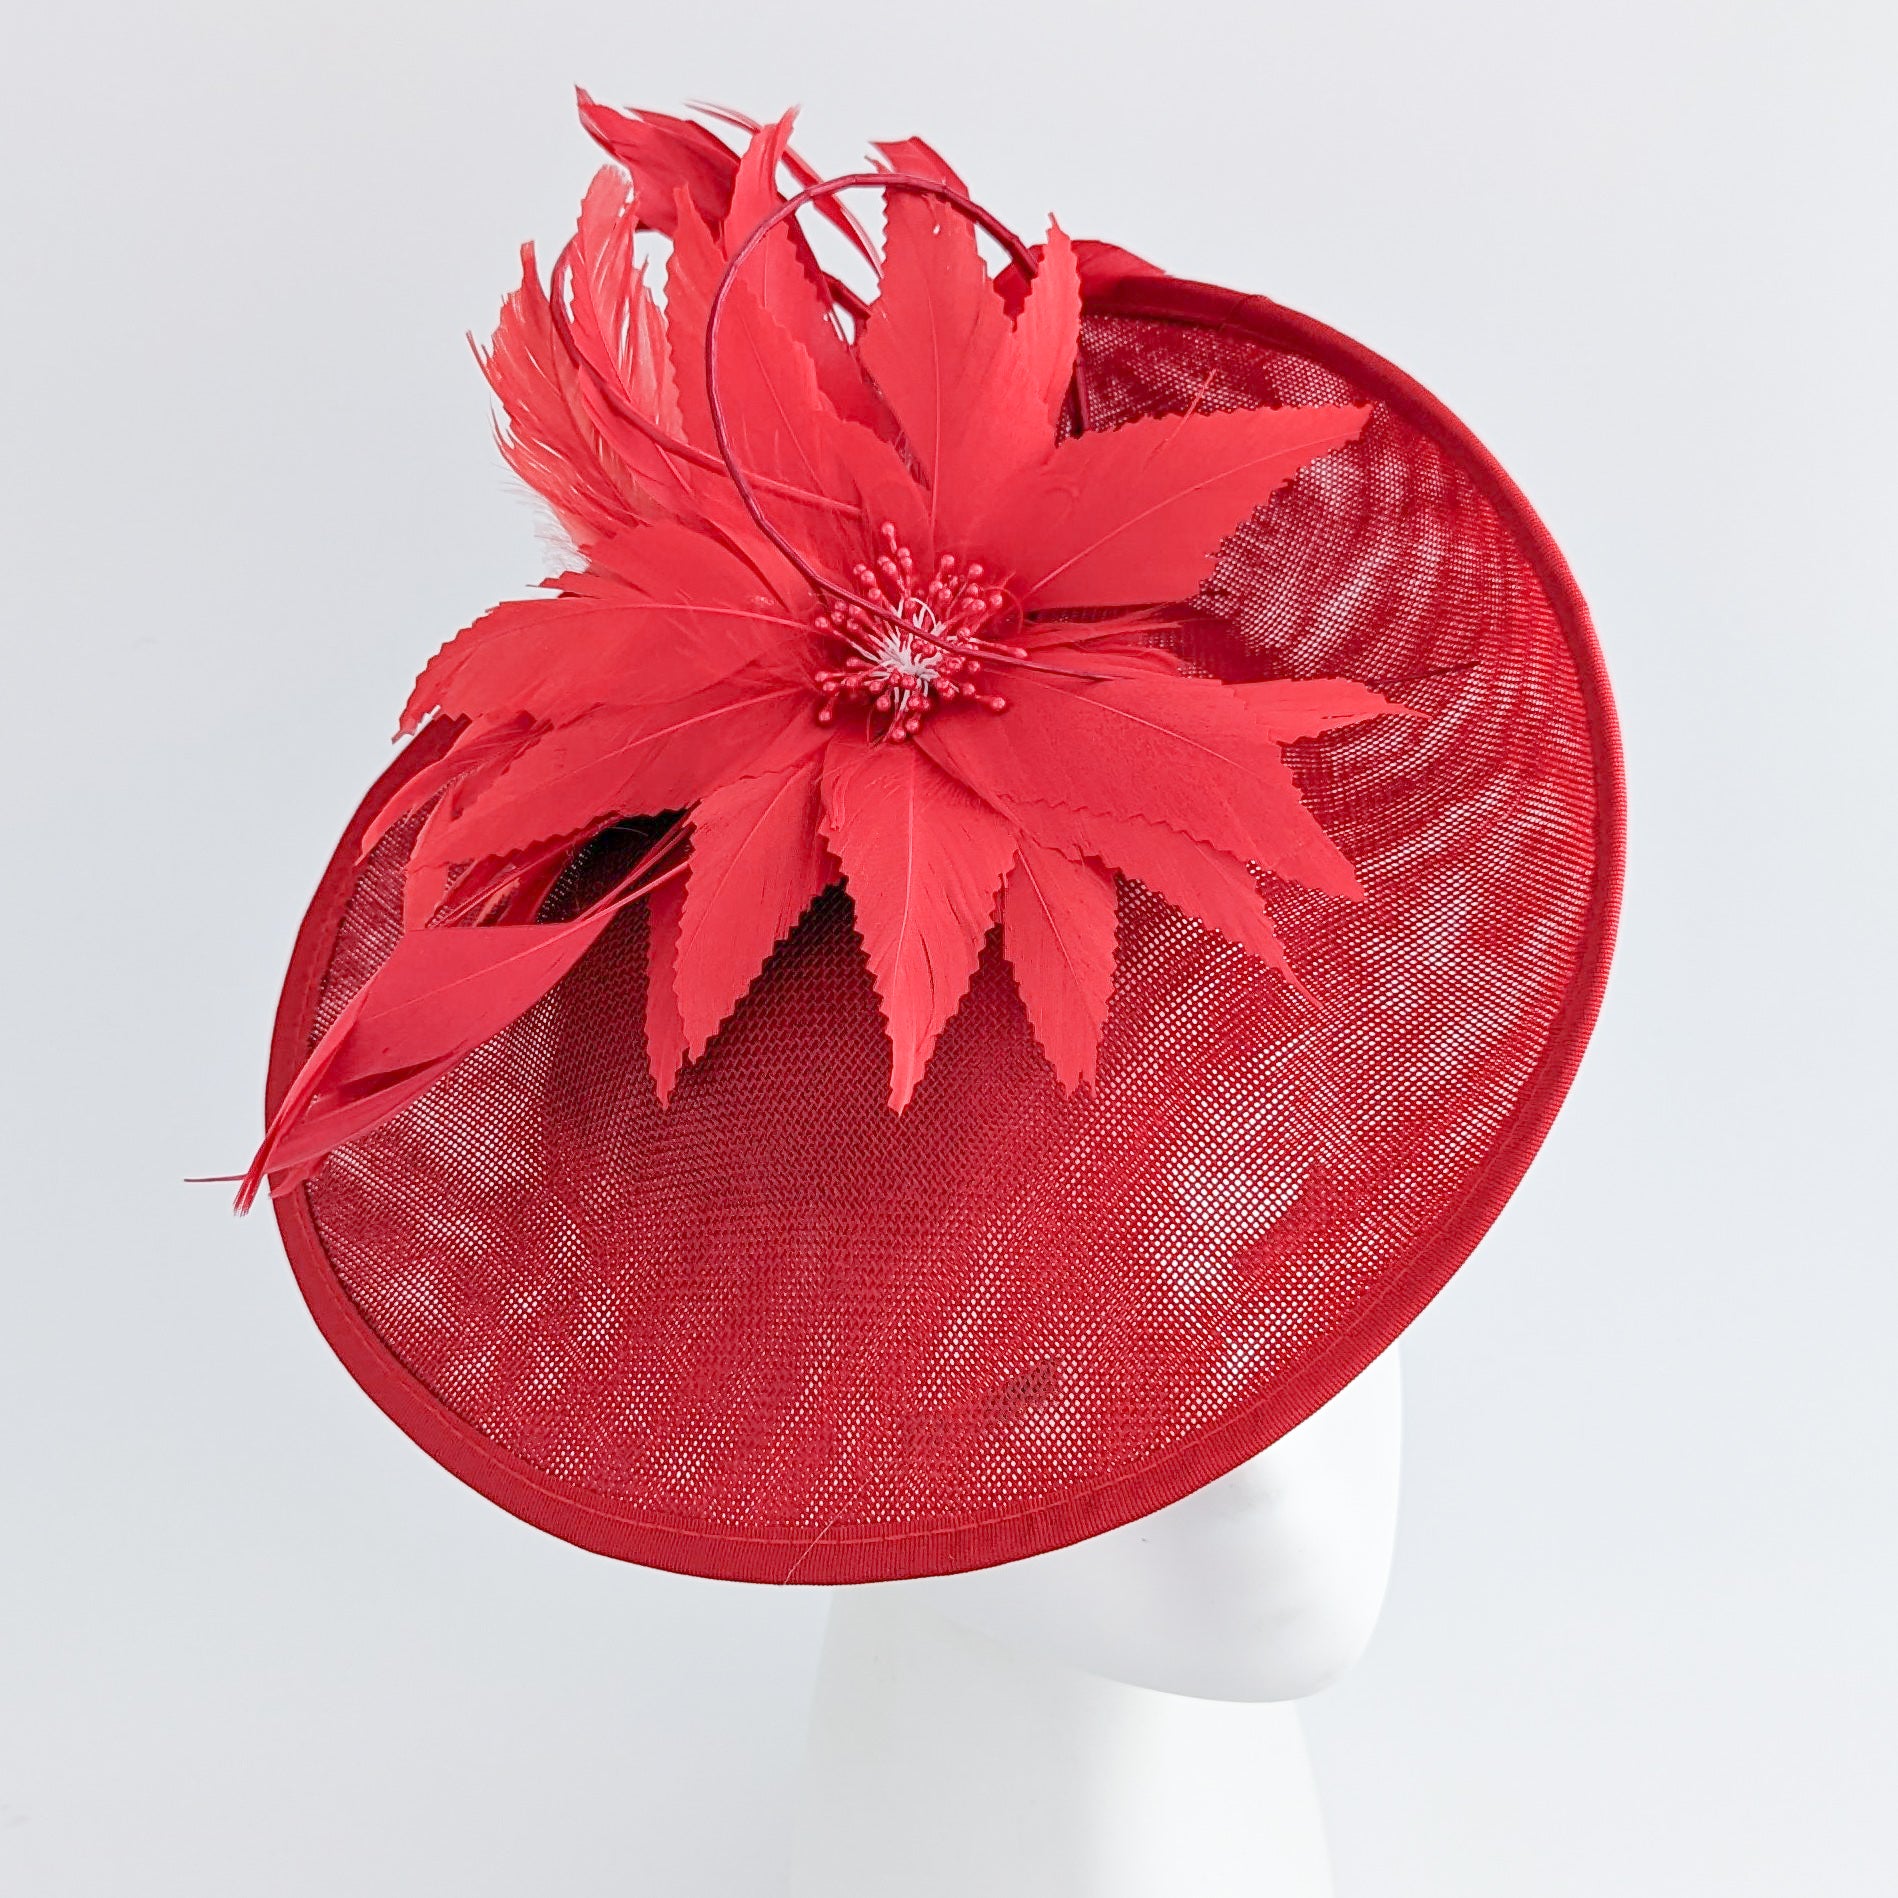 Red large feather saucer disc fascinator hat